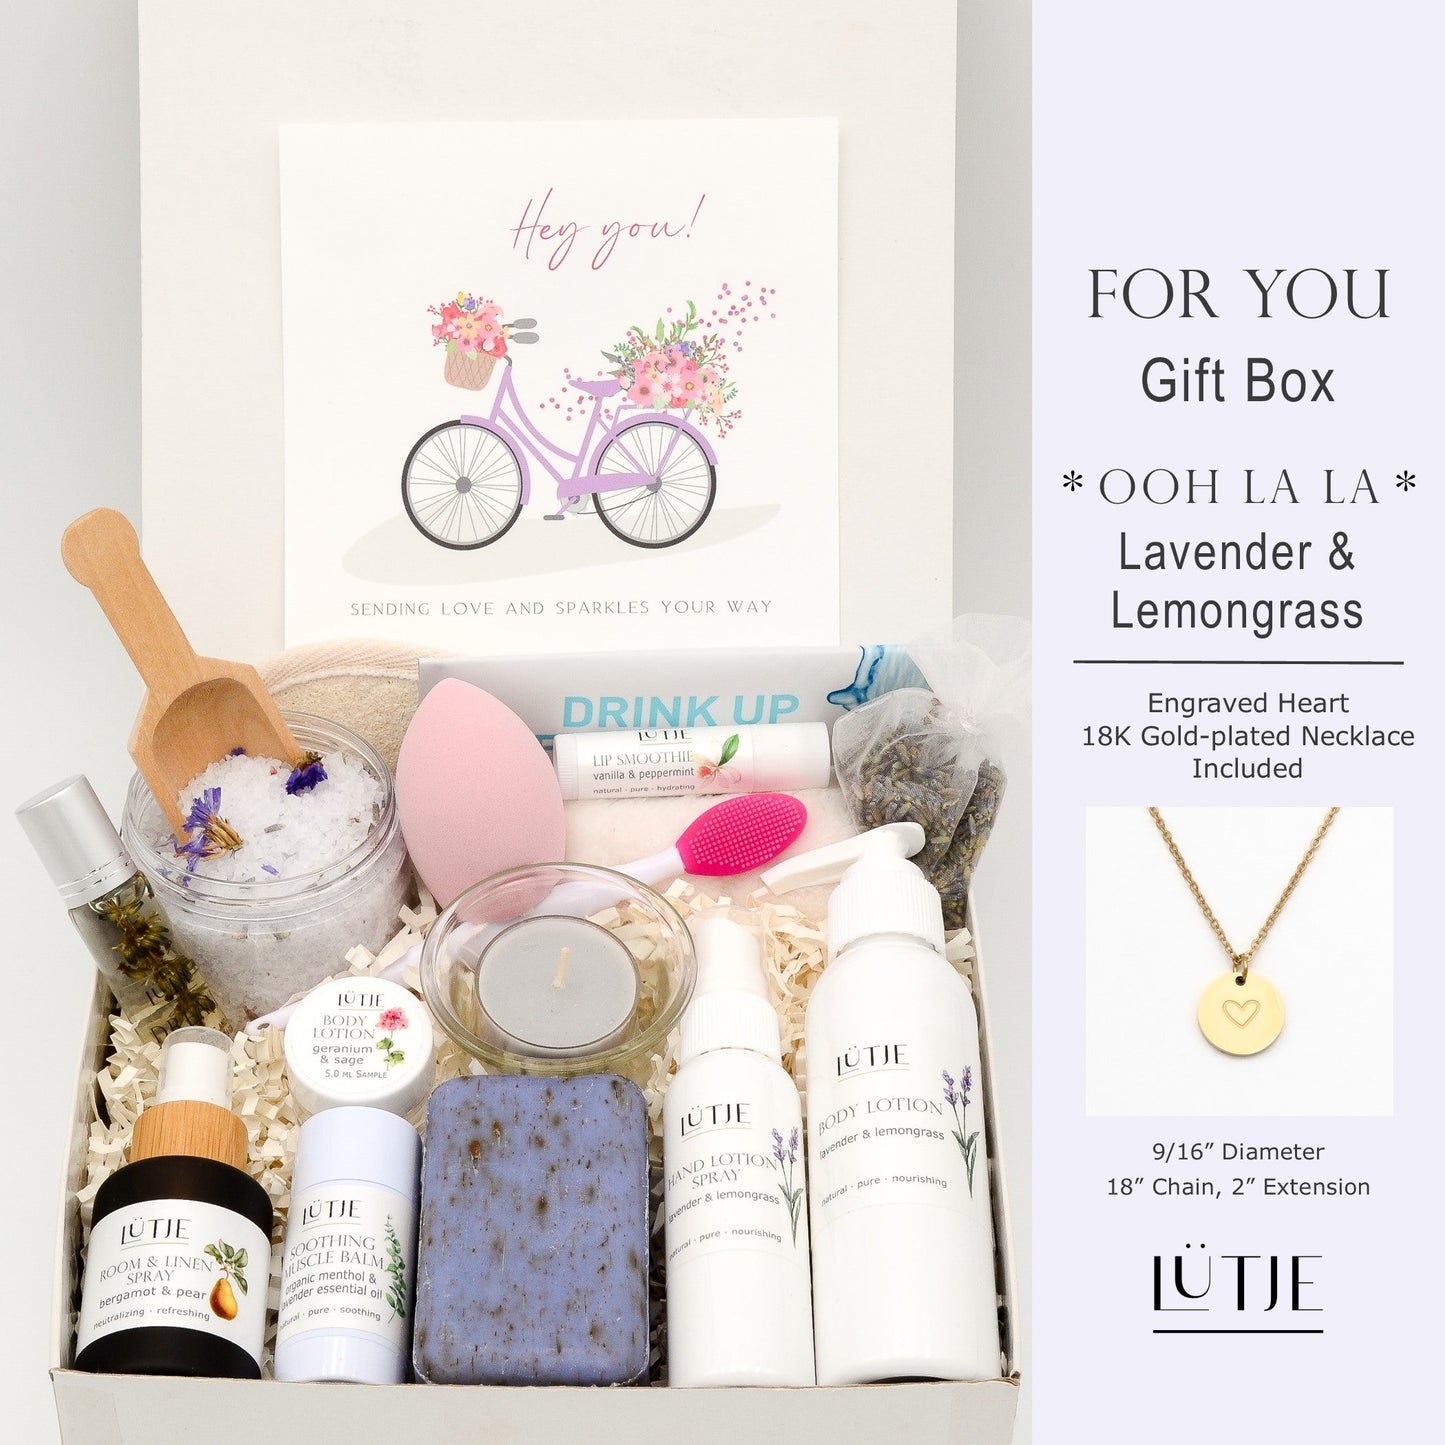 Gift Boxes for women, wife, daughter, BFF, sister, mom, or grandma, includes Lavender & Lemongrass hand lotion spray and body lotion, essential oil, lip balm, soothing muscle balm, Bergamot & Pear room & linen spray, French soap, French bath salts, hydrating face mask, other bath, spa and self-care items, and 18K gold-plated necklace with engraved heart.